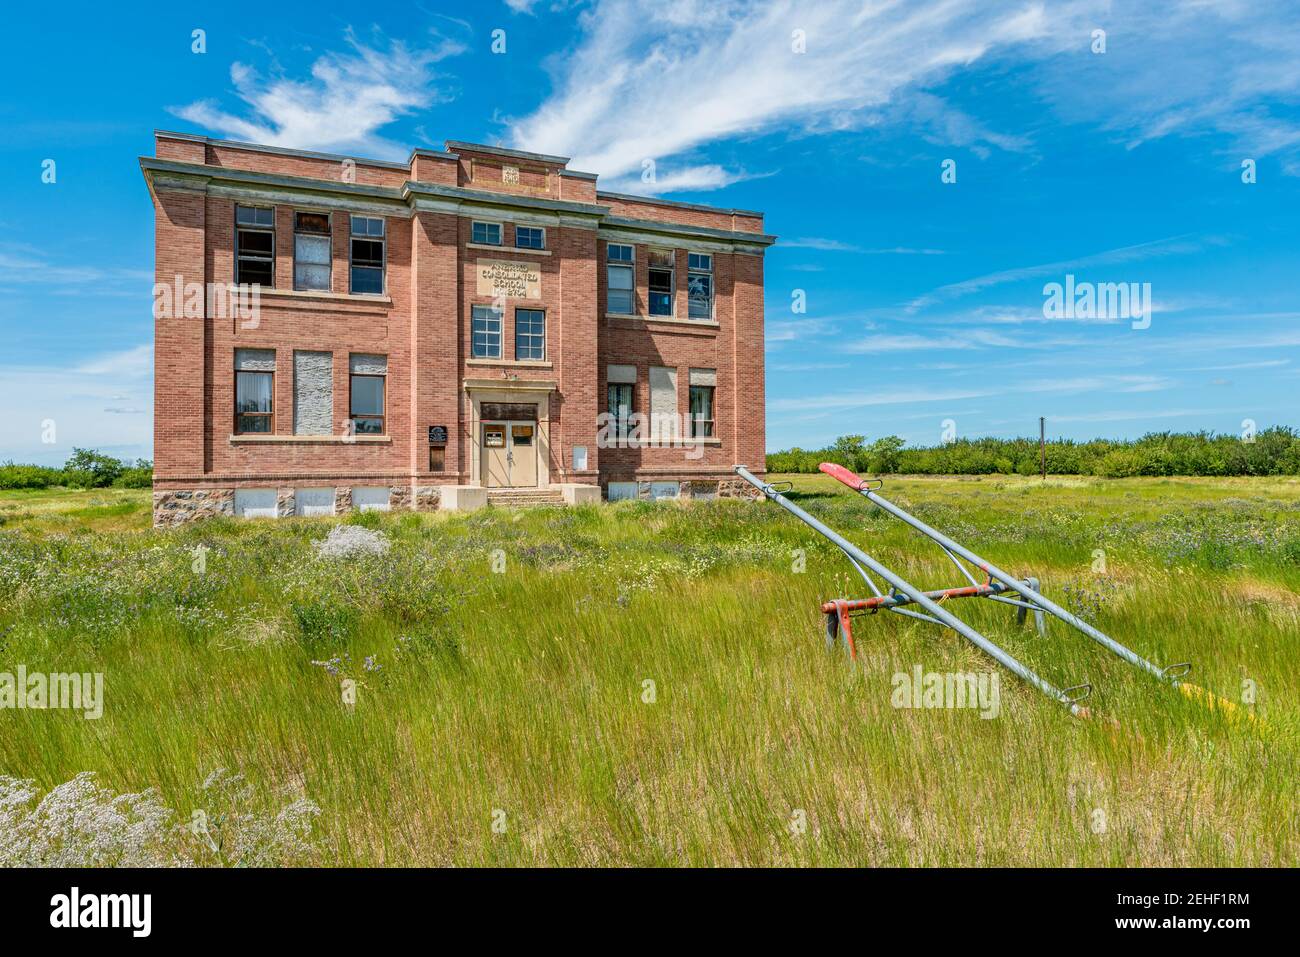 The old, abandoned Aneroid Consolidated School in Aneroid, Saskatchewan, Canada with teeter totters in the foreground Stock Photo